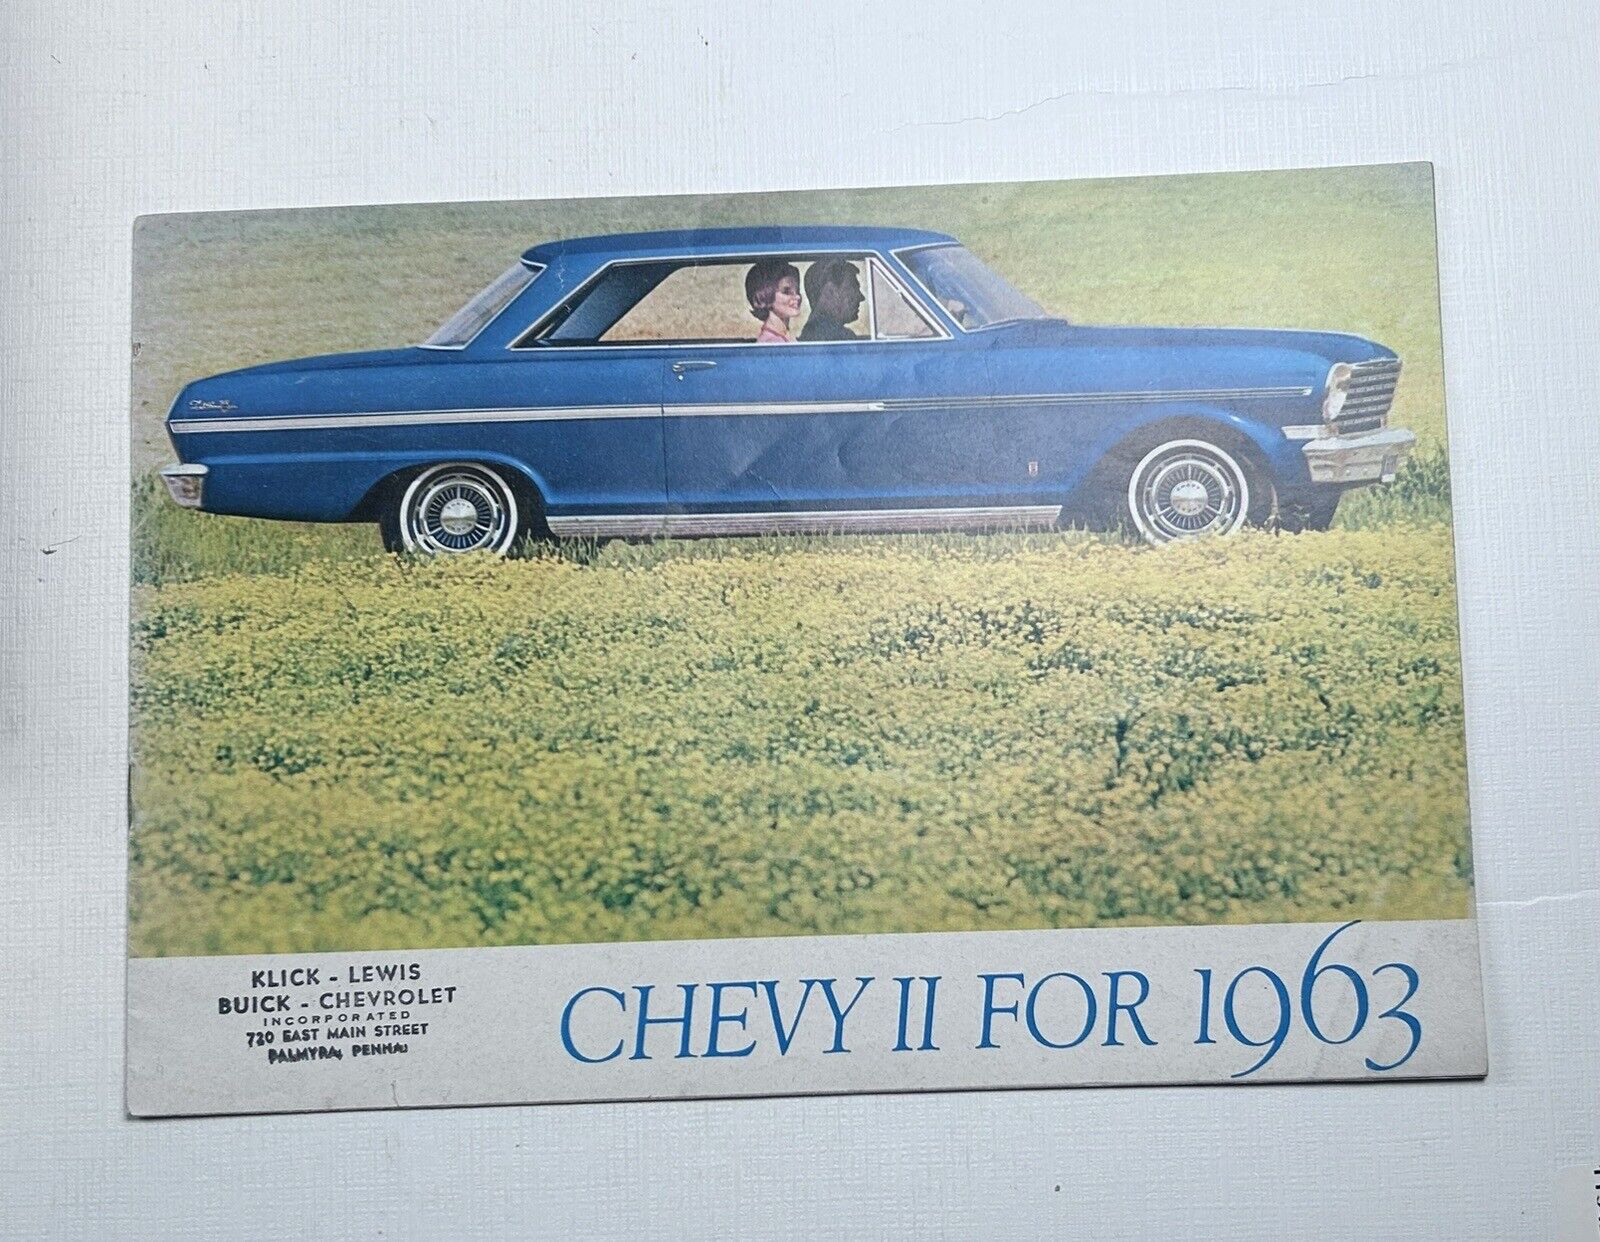 Chevy II Vintage Car Brochure For 1963